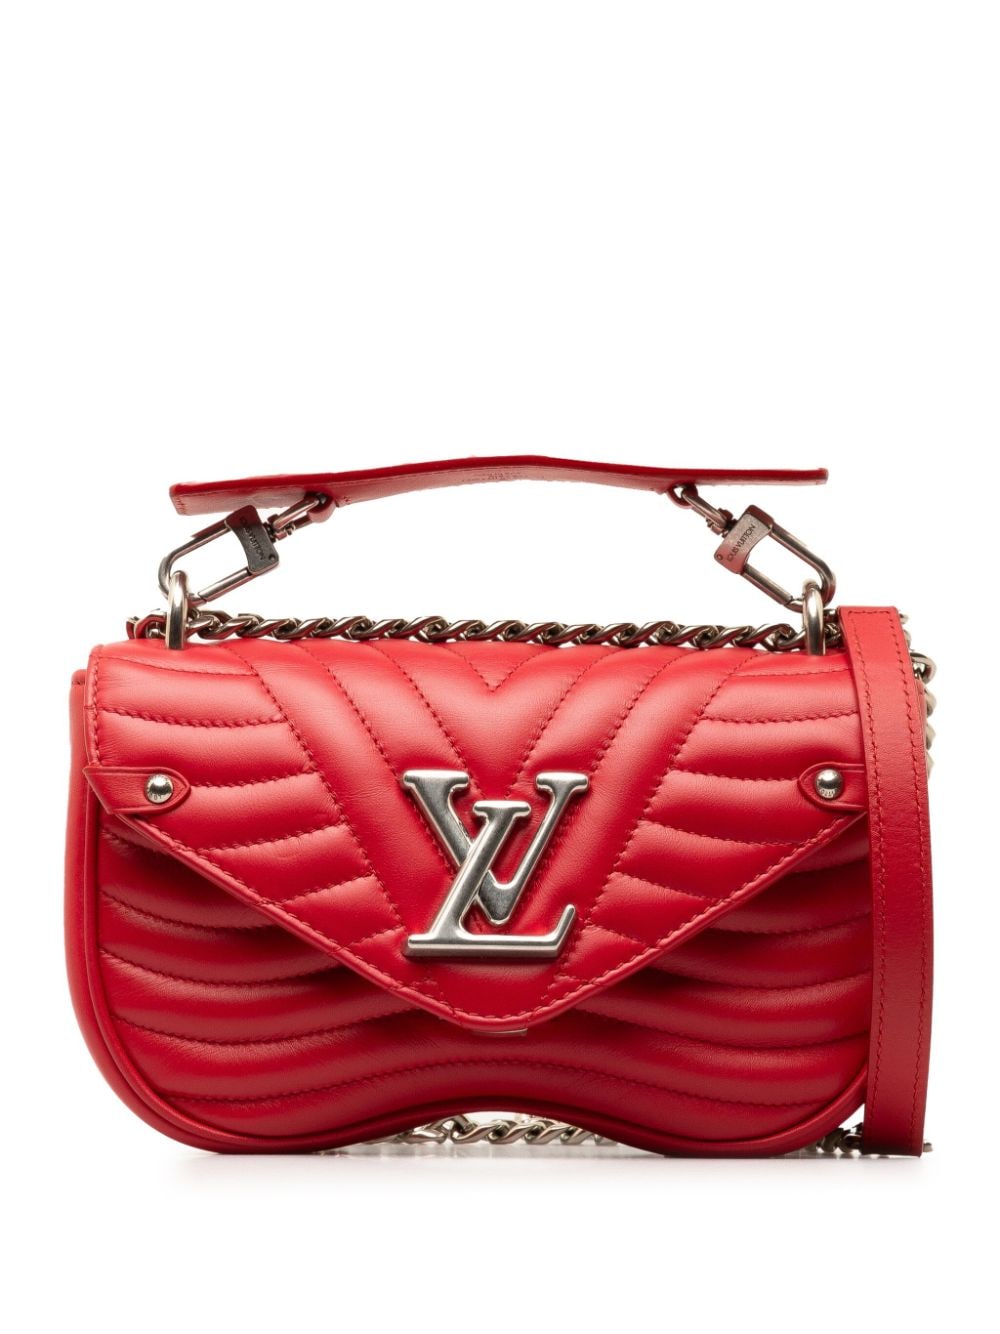 Pre-owned Louis Vuitton 2019 New Wave Chain Bag Mm Satchel In Red